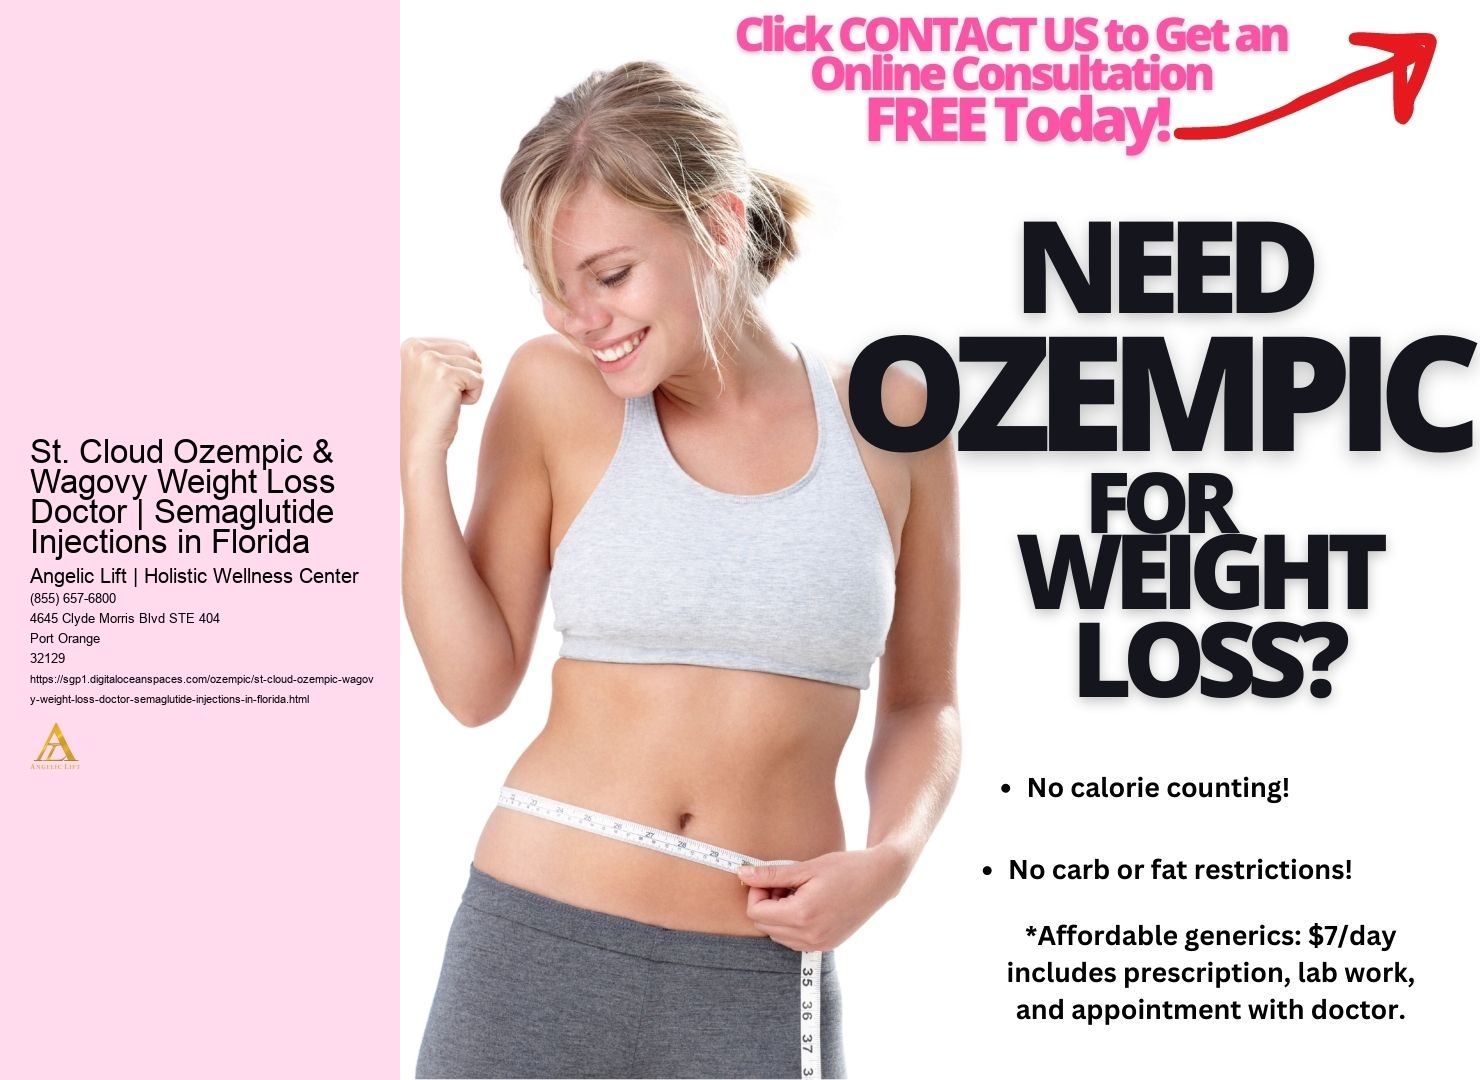 St. Cloud Ozempic & Wagovy Weight Loss Doctor | Semaglutide Injections in Florida